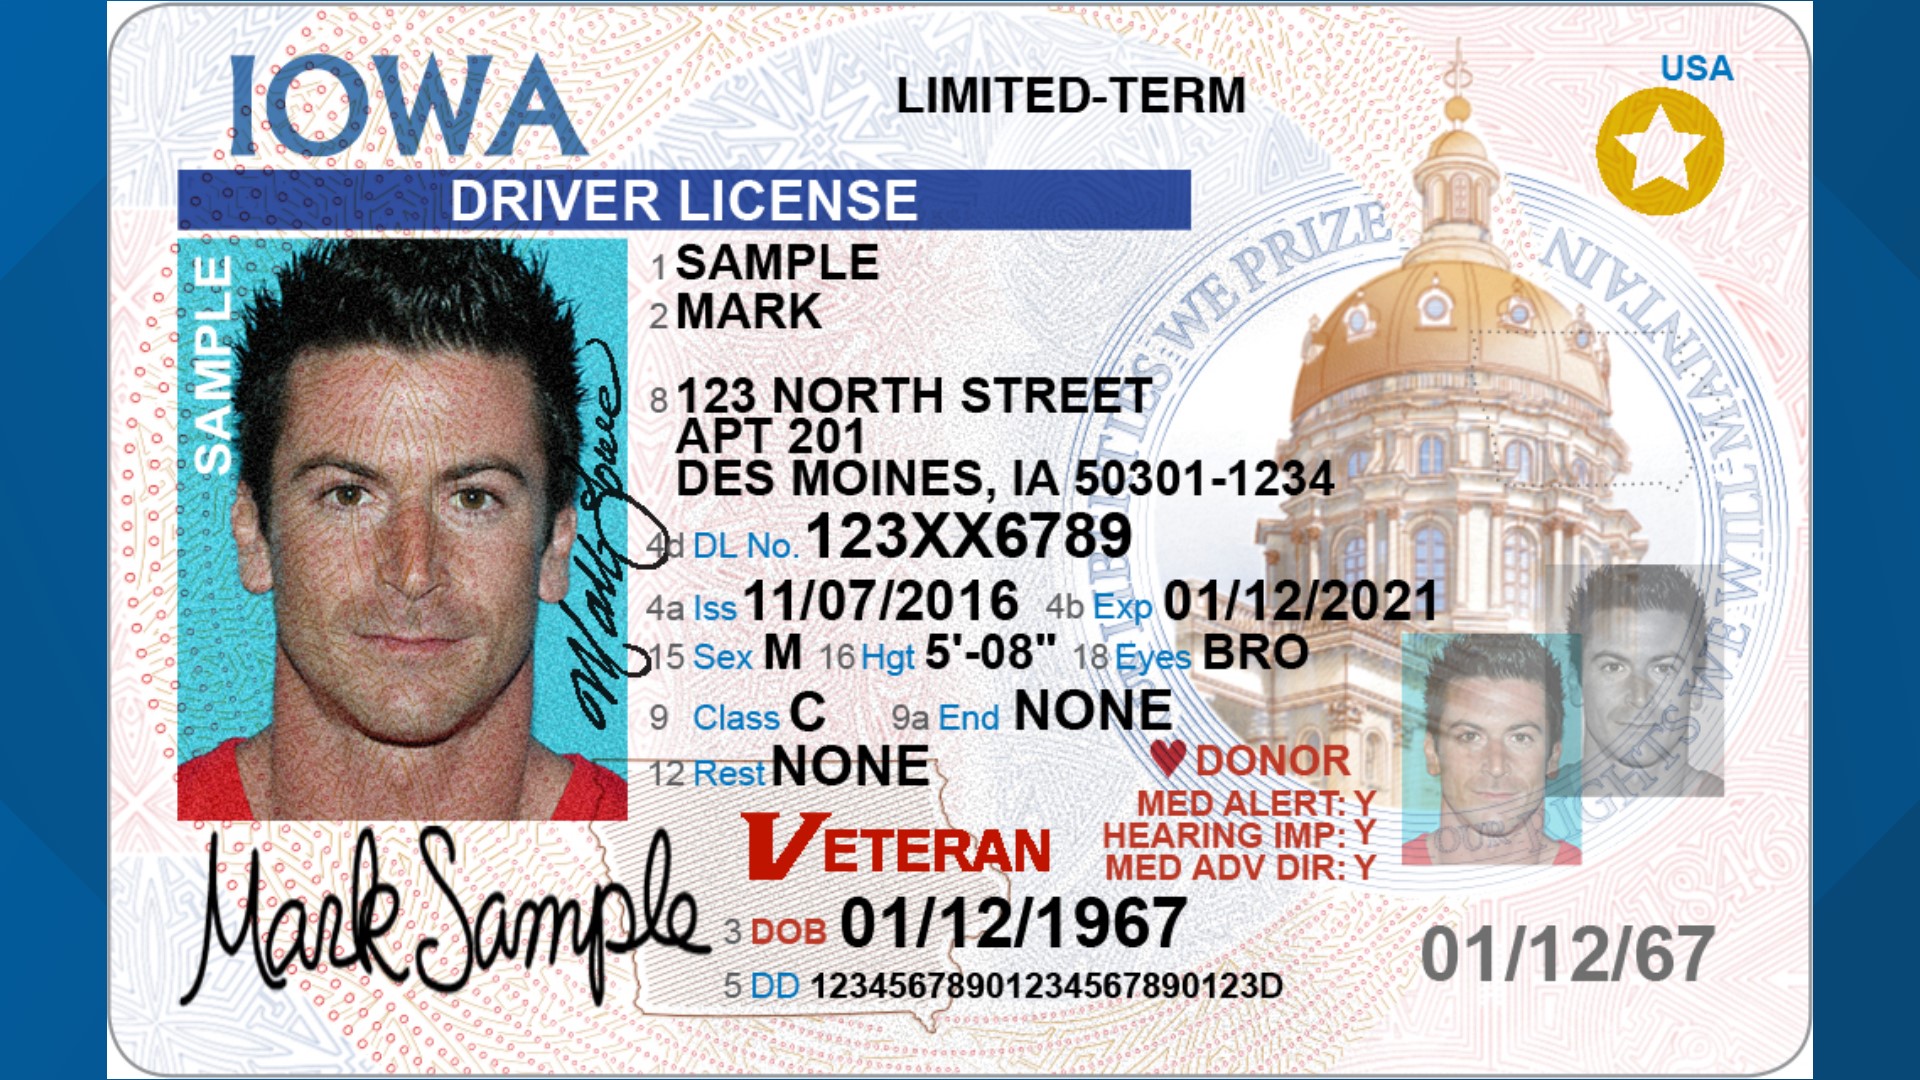 not-sure-if-expired-driver-s-license-is-still-valid-due-to-covid